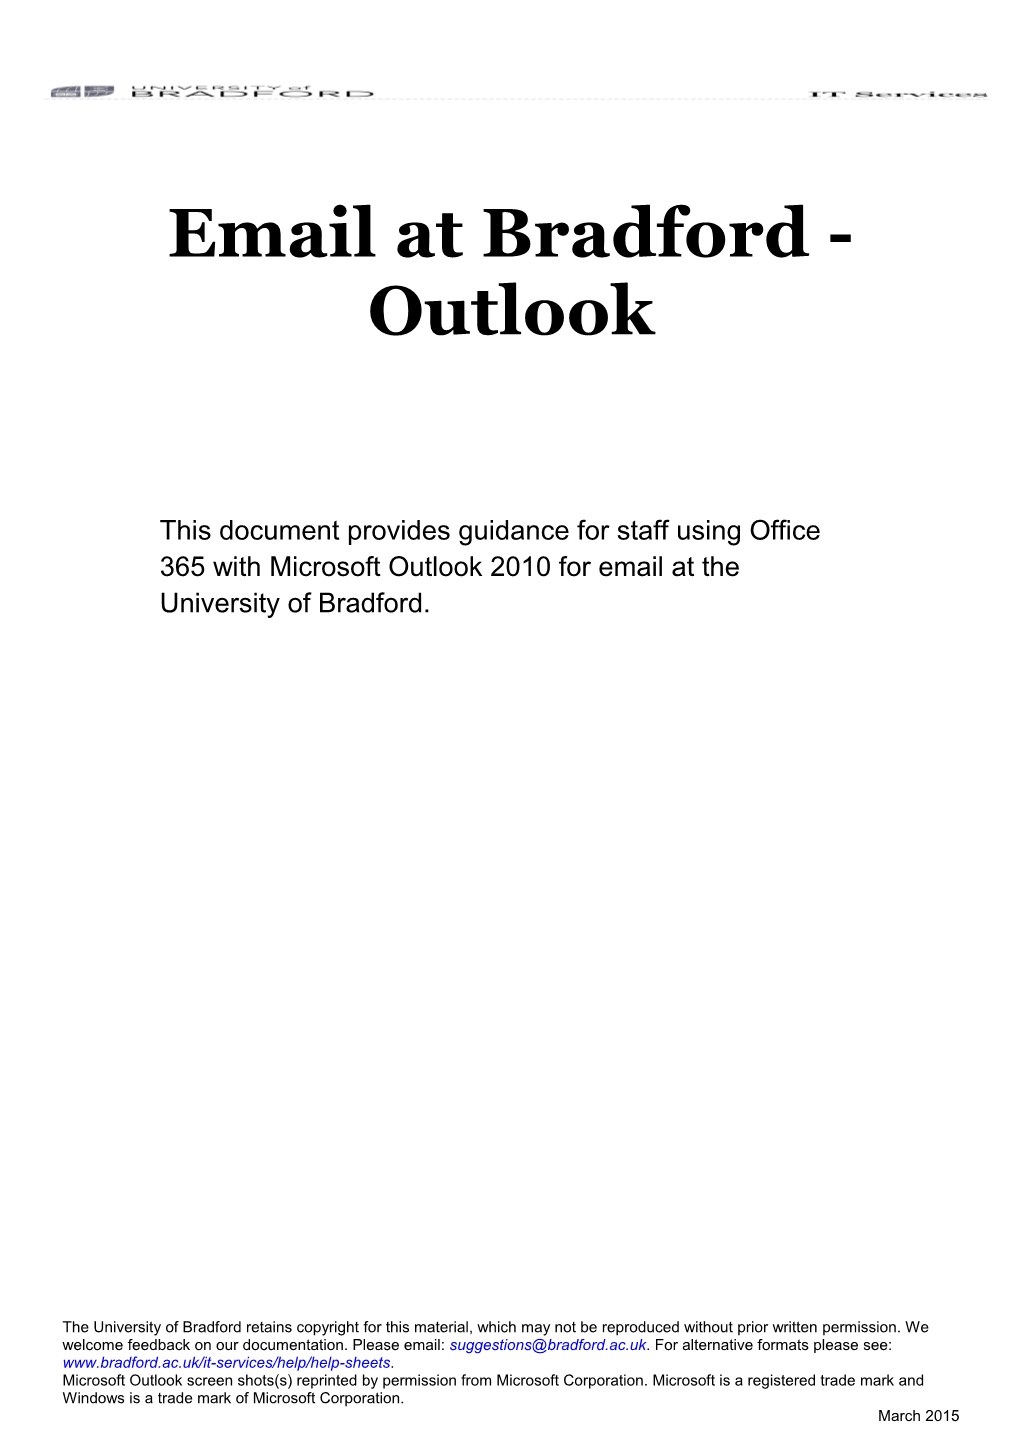 Email at Bradford - Outlook